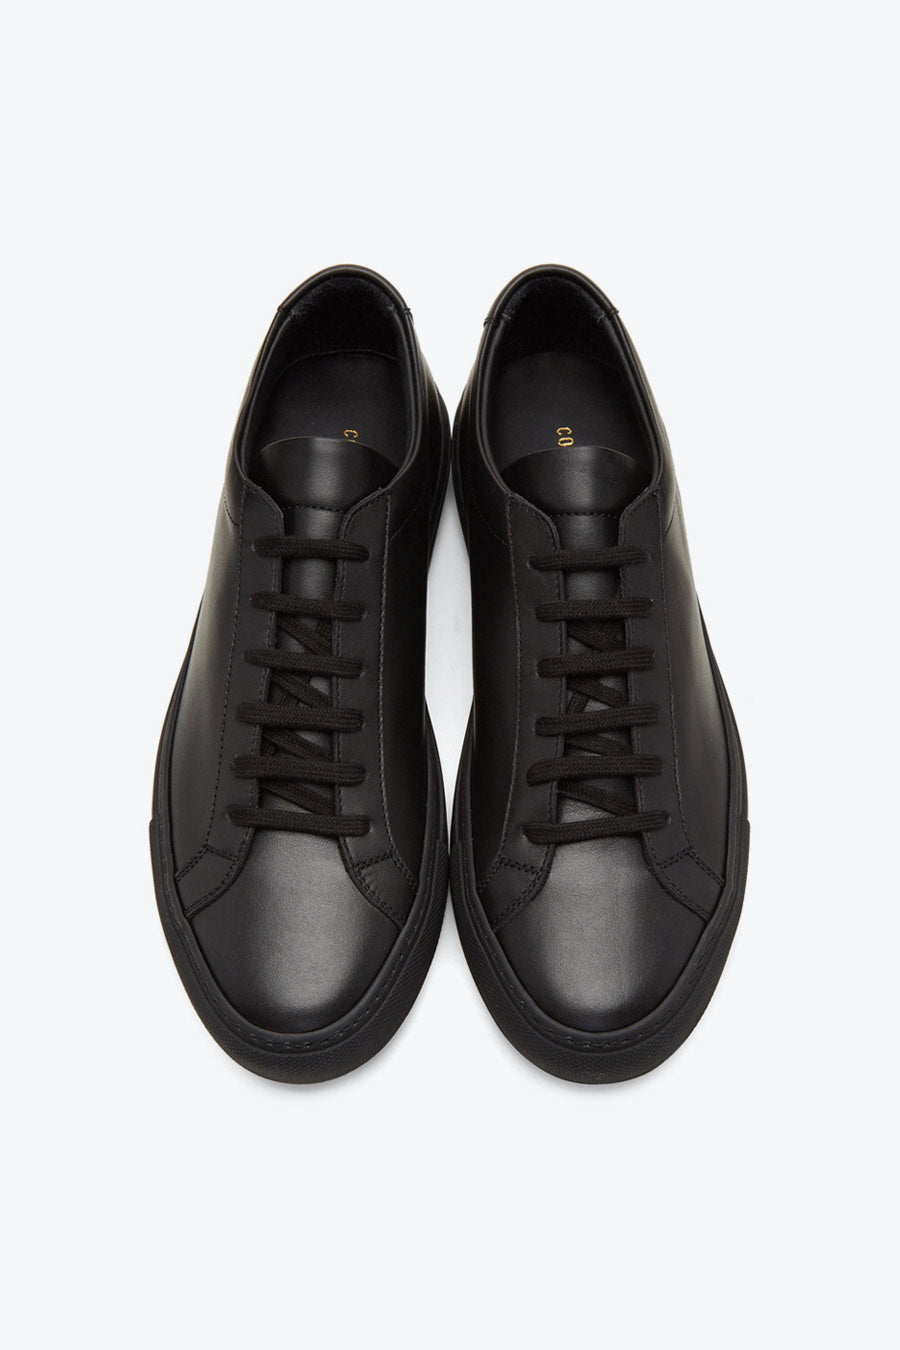 COMMON PROJECTS | ORIGINAL ACHILLES LOW 1528 / BLACK 7547 アキレス 